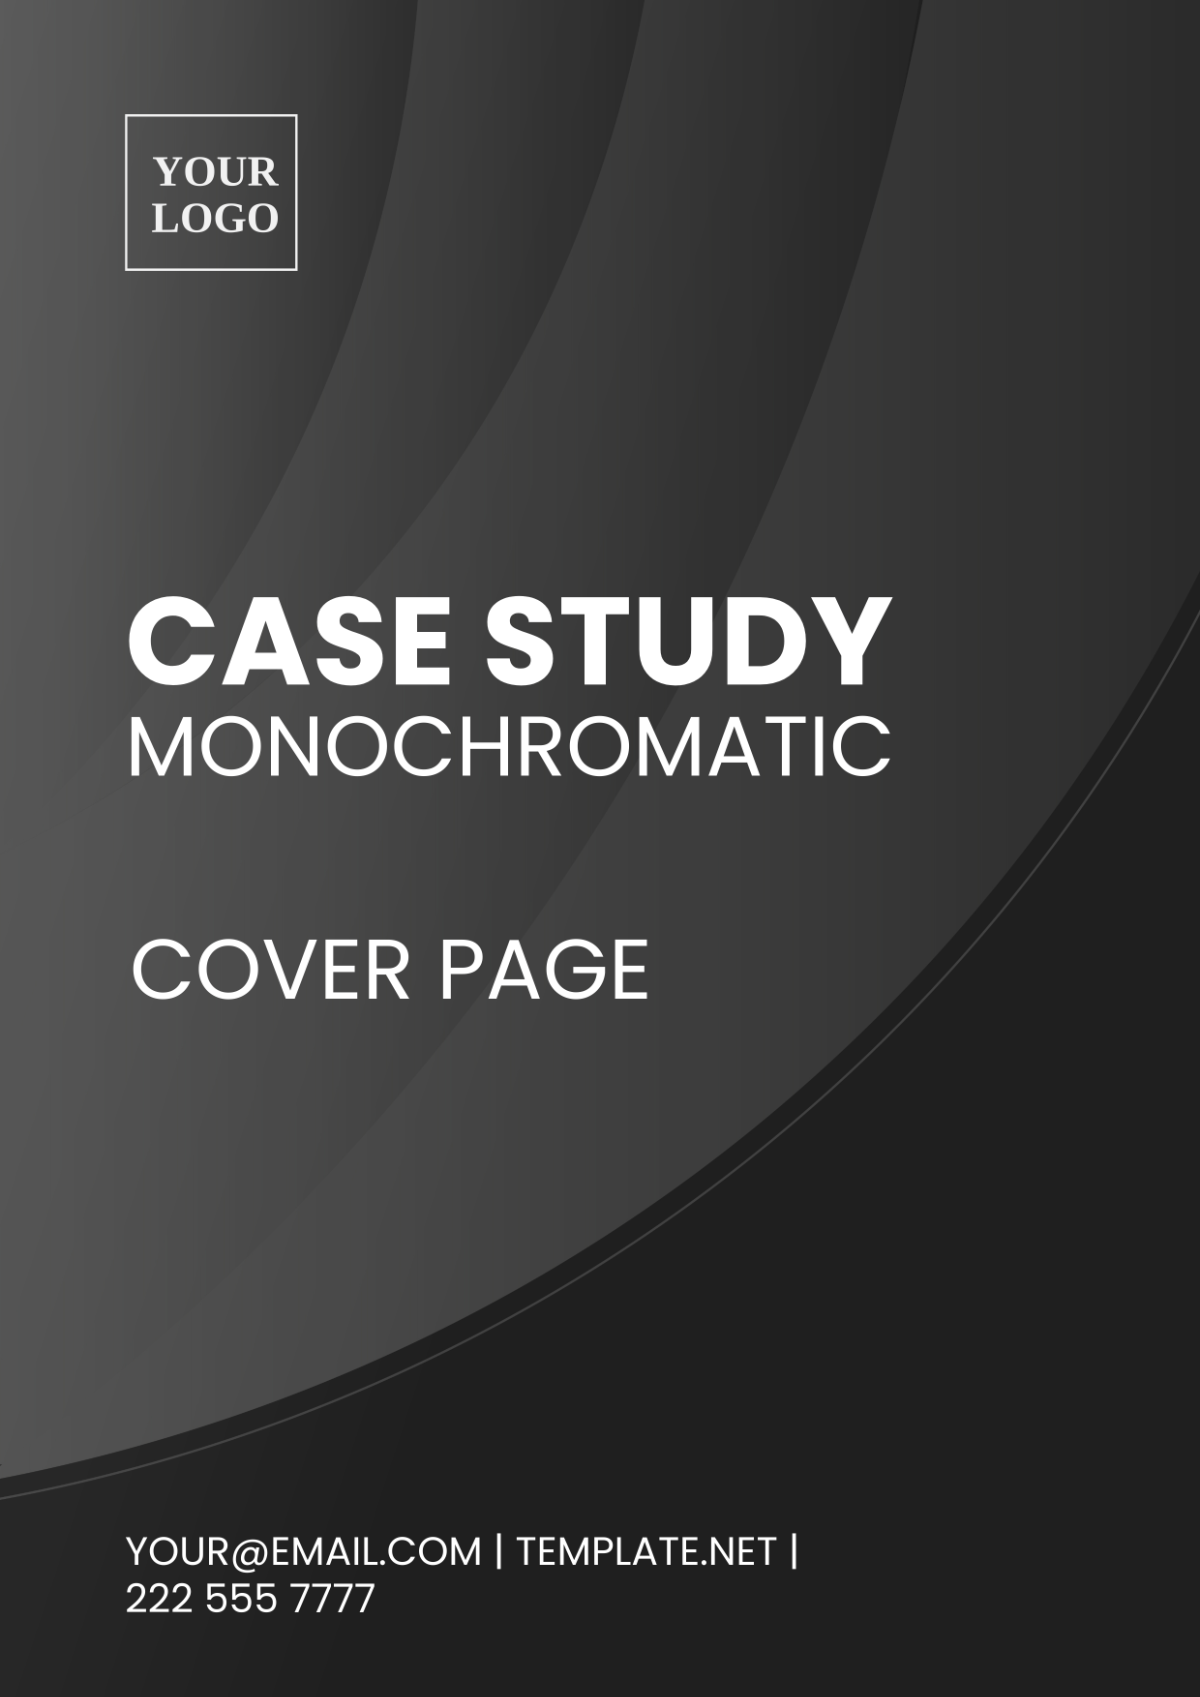 Case Study Monochromatic Cover Page